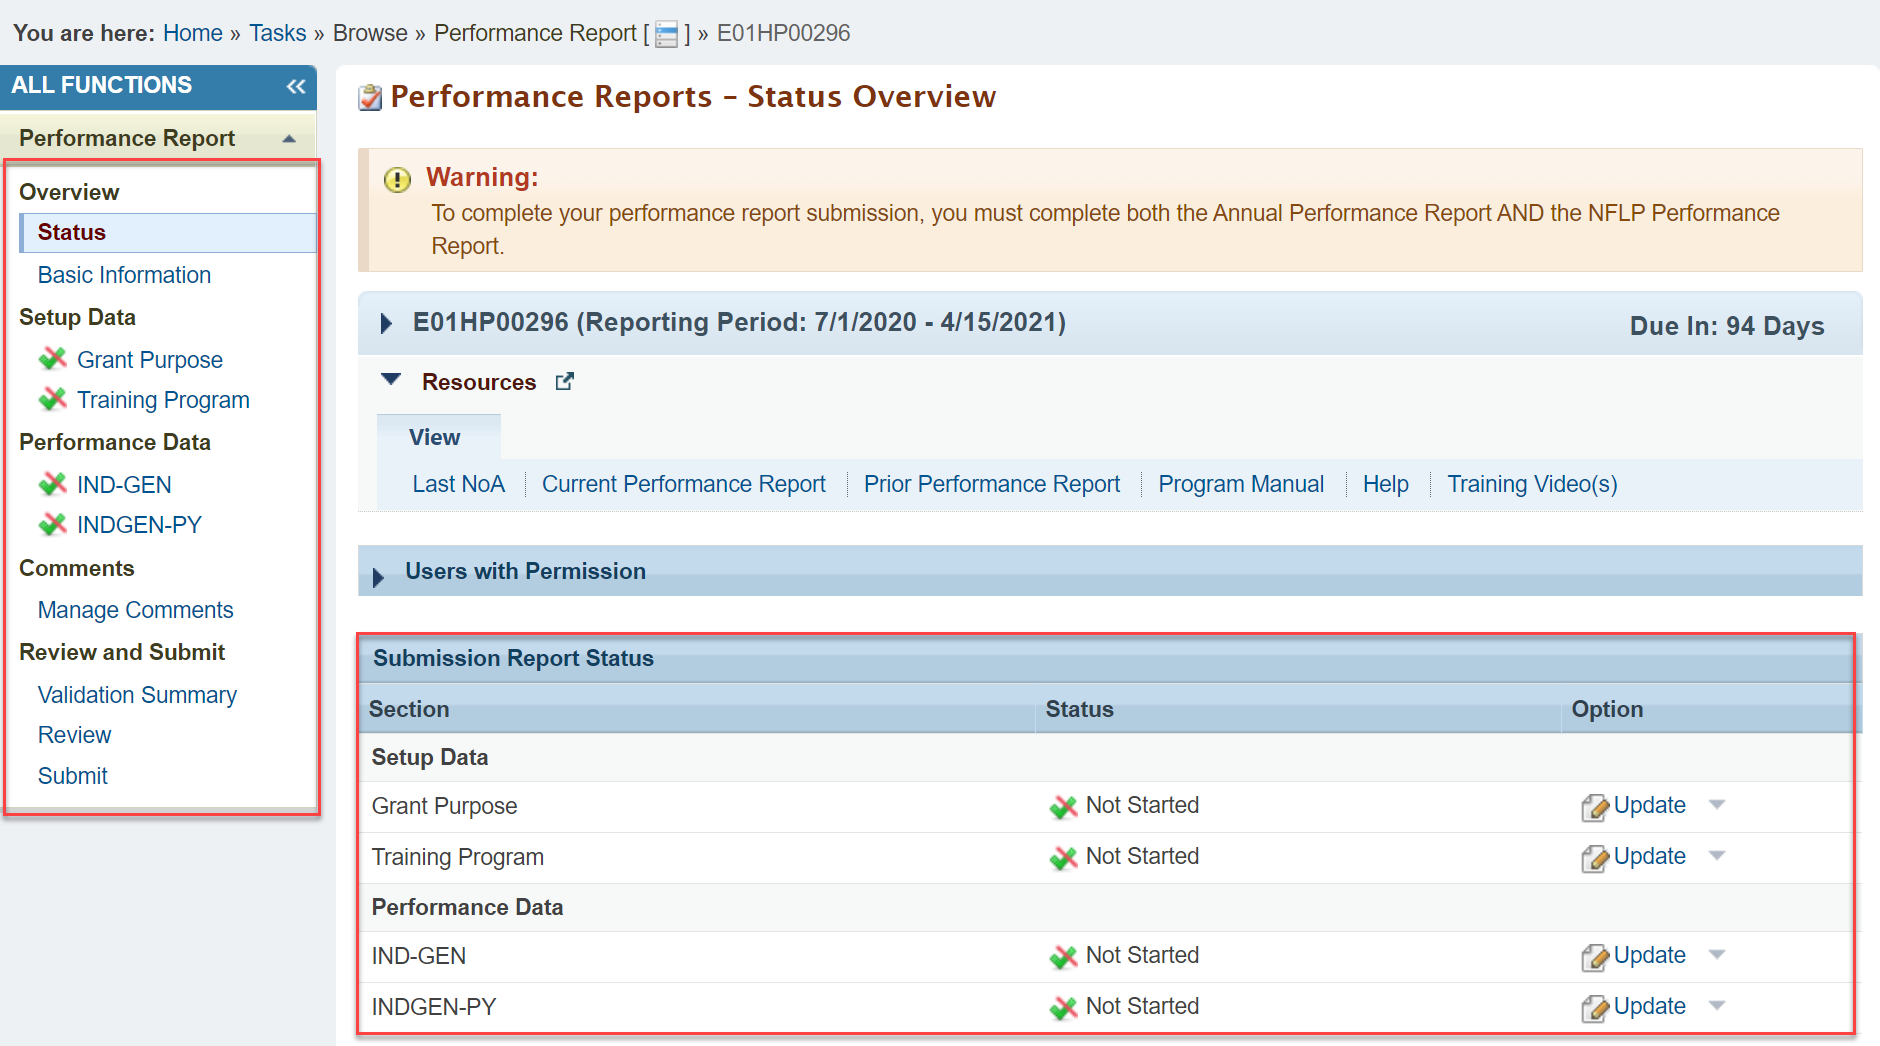 Screenshot of the Performance Reports Status Overview page showing the different forms to complete